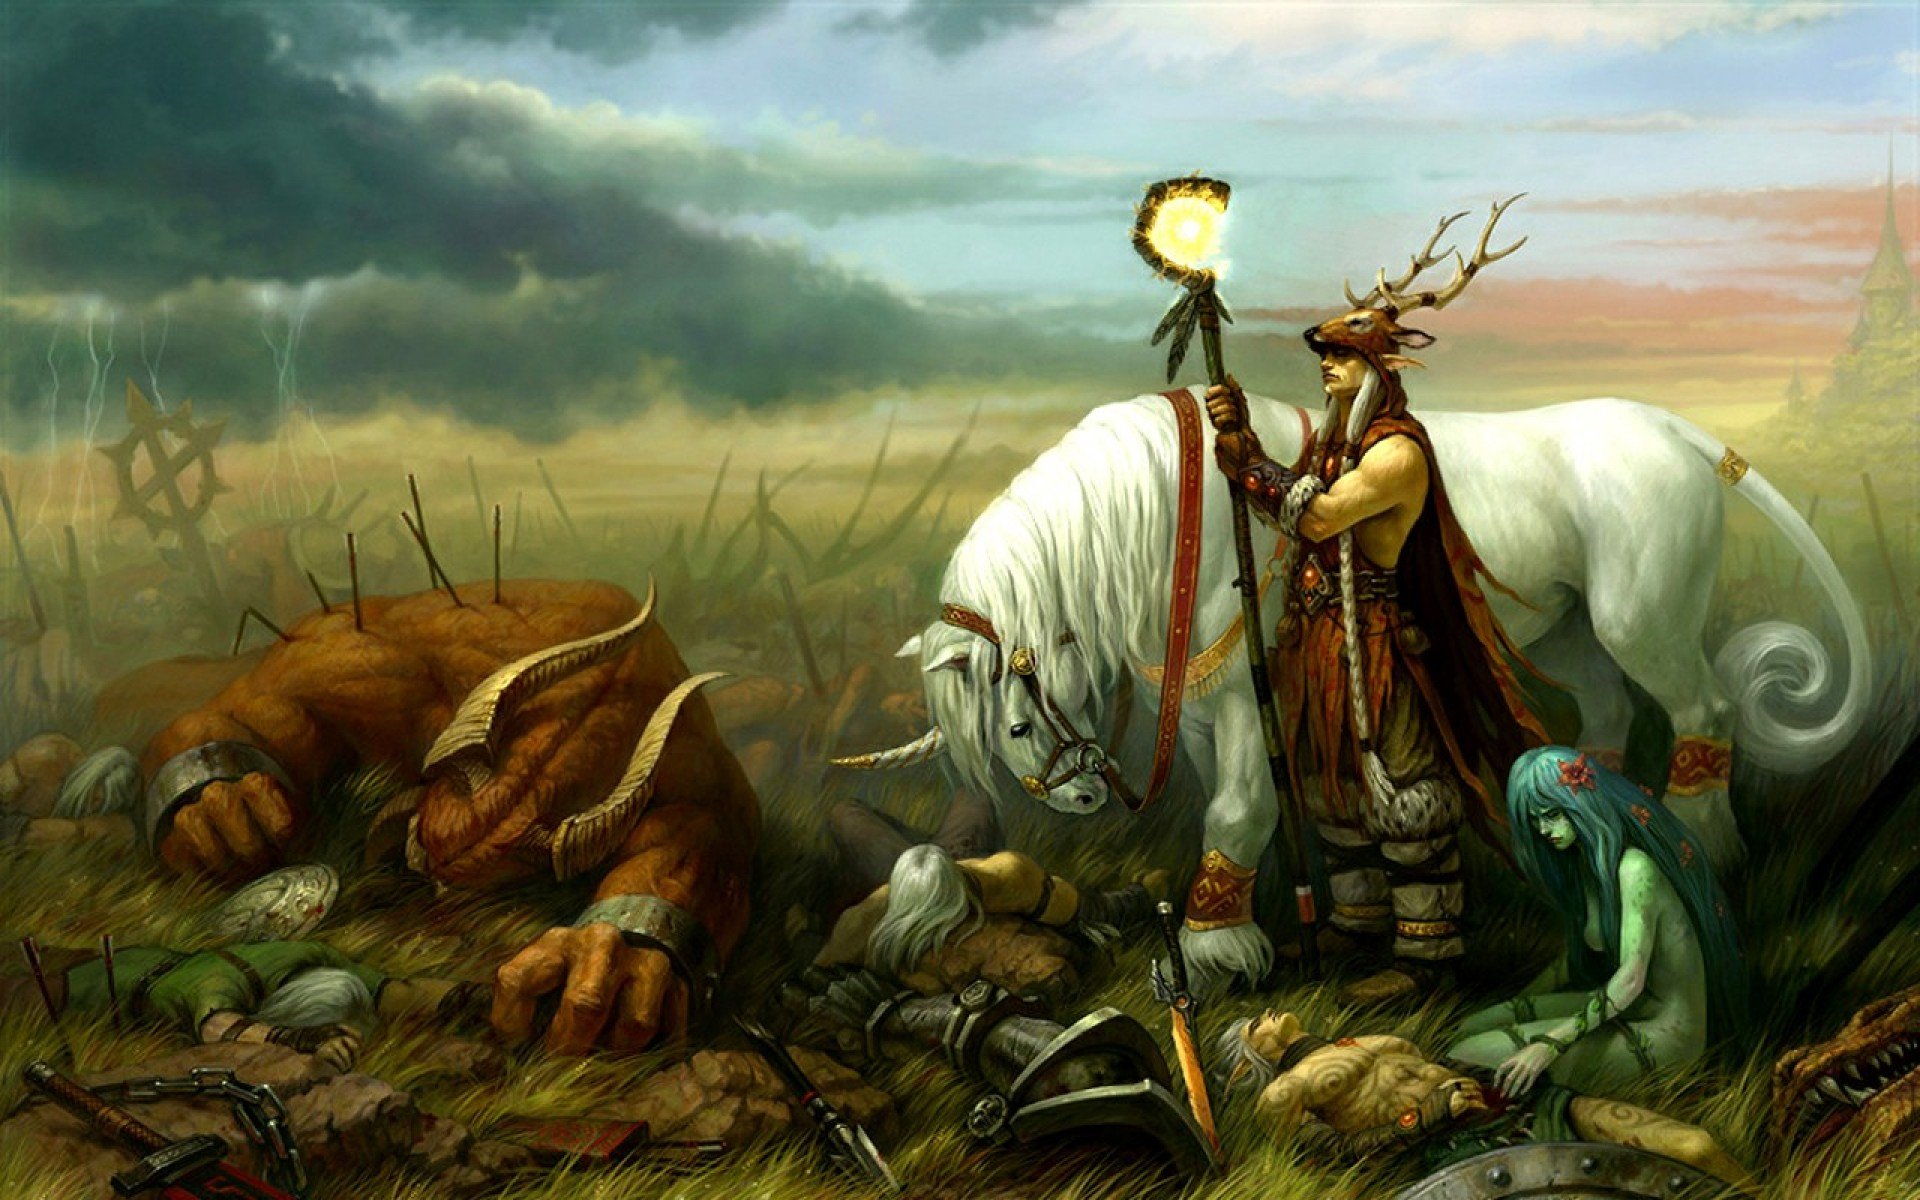 heroes, Might, Magic, Strategy, Fantasy, Fighting, Adventure, Action, Online, 1hmm, Monster, Horse, Warrior, Magic Wallpaper